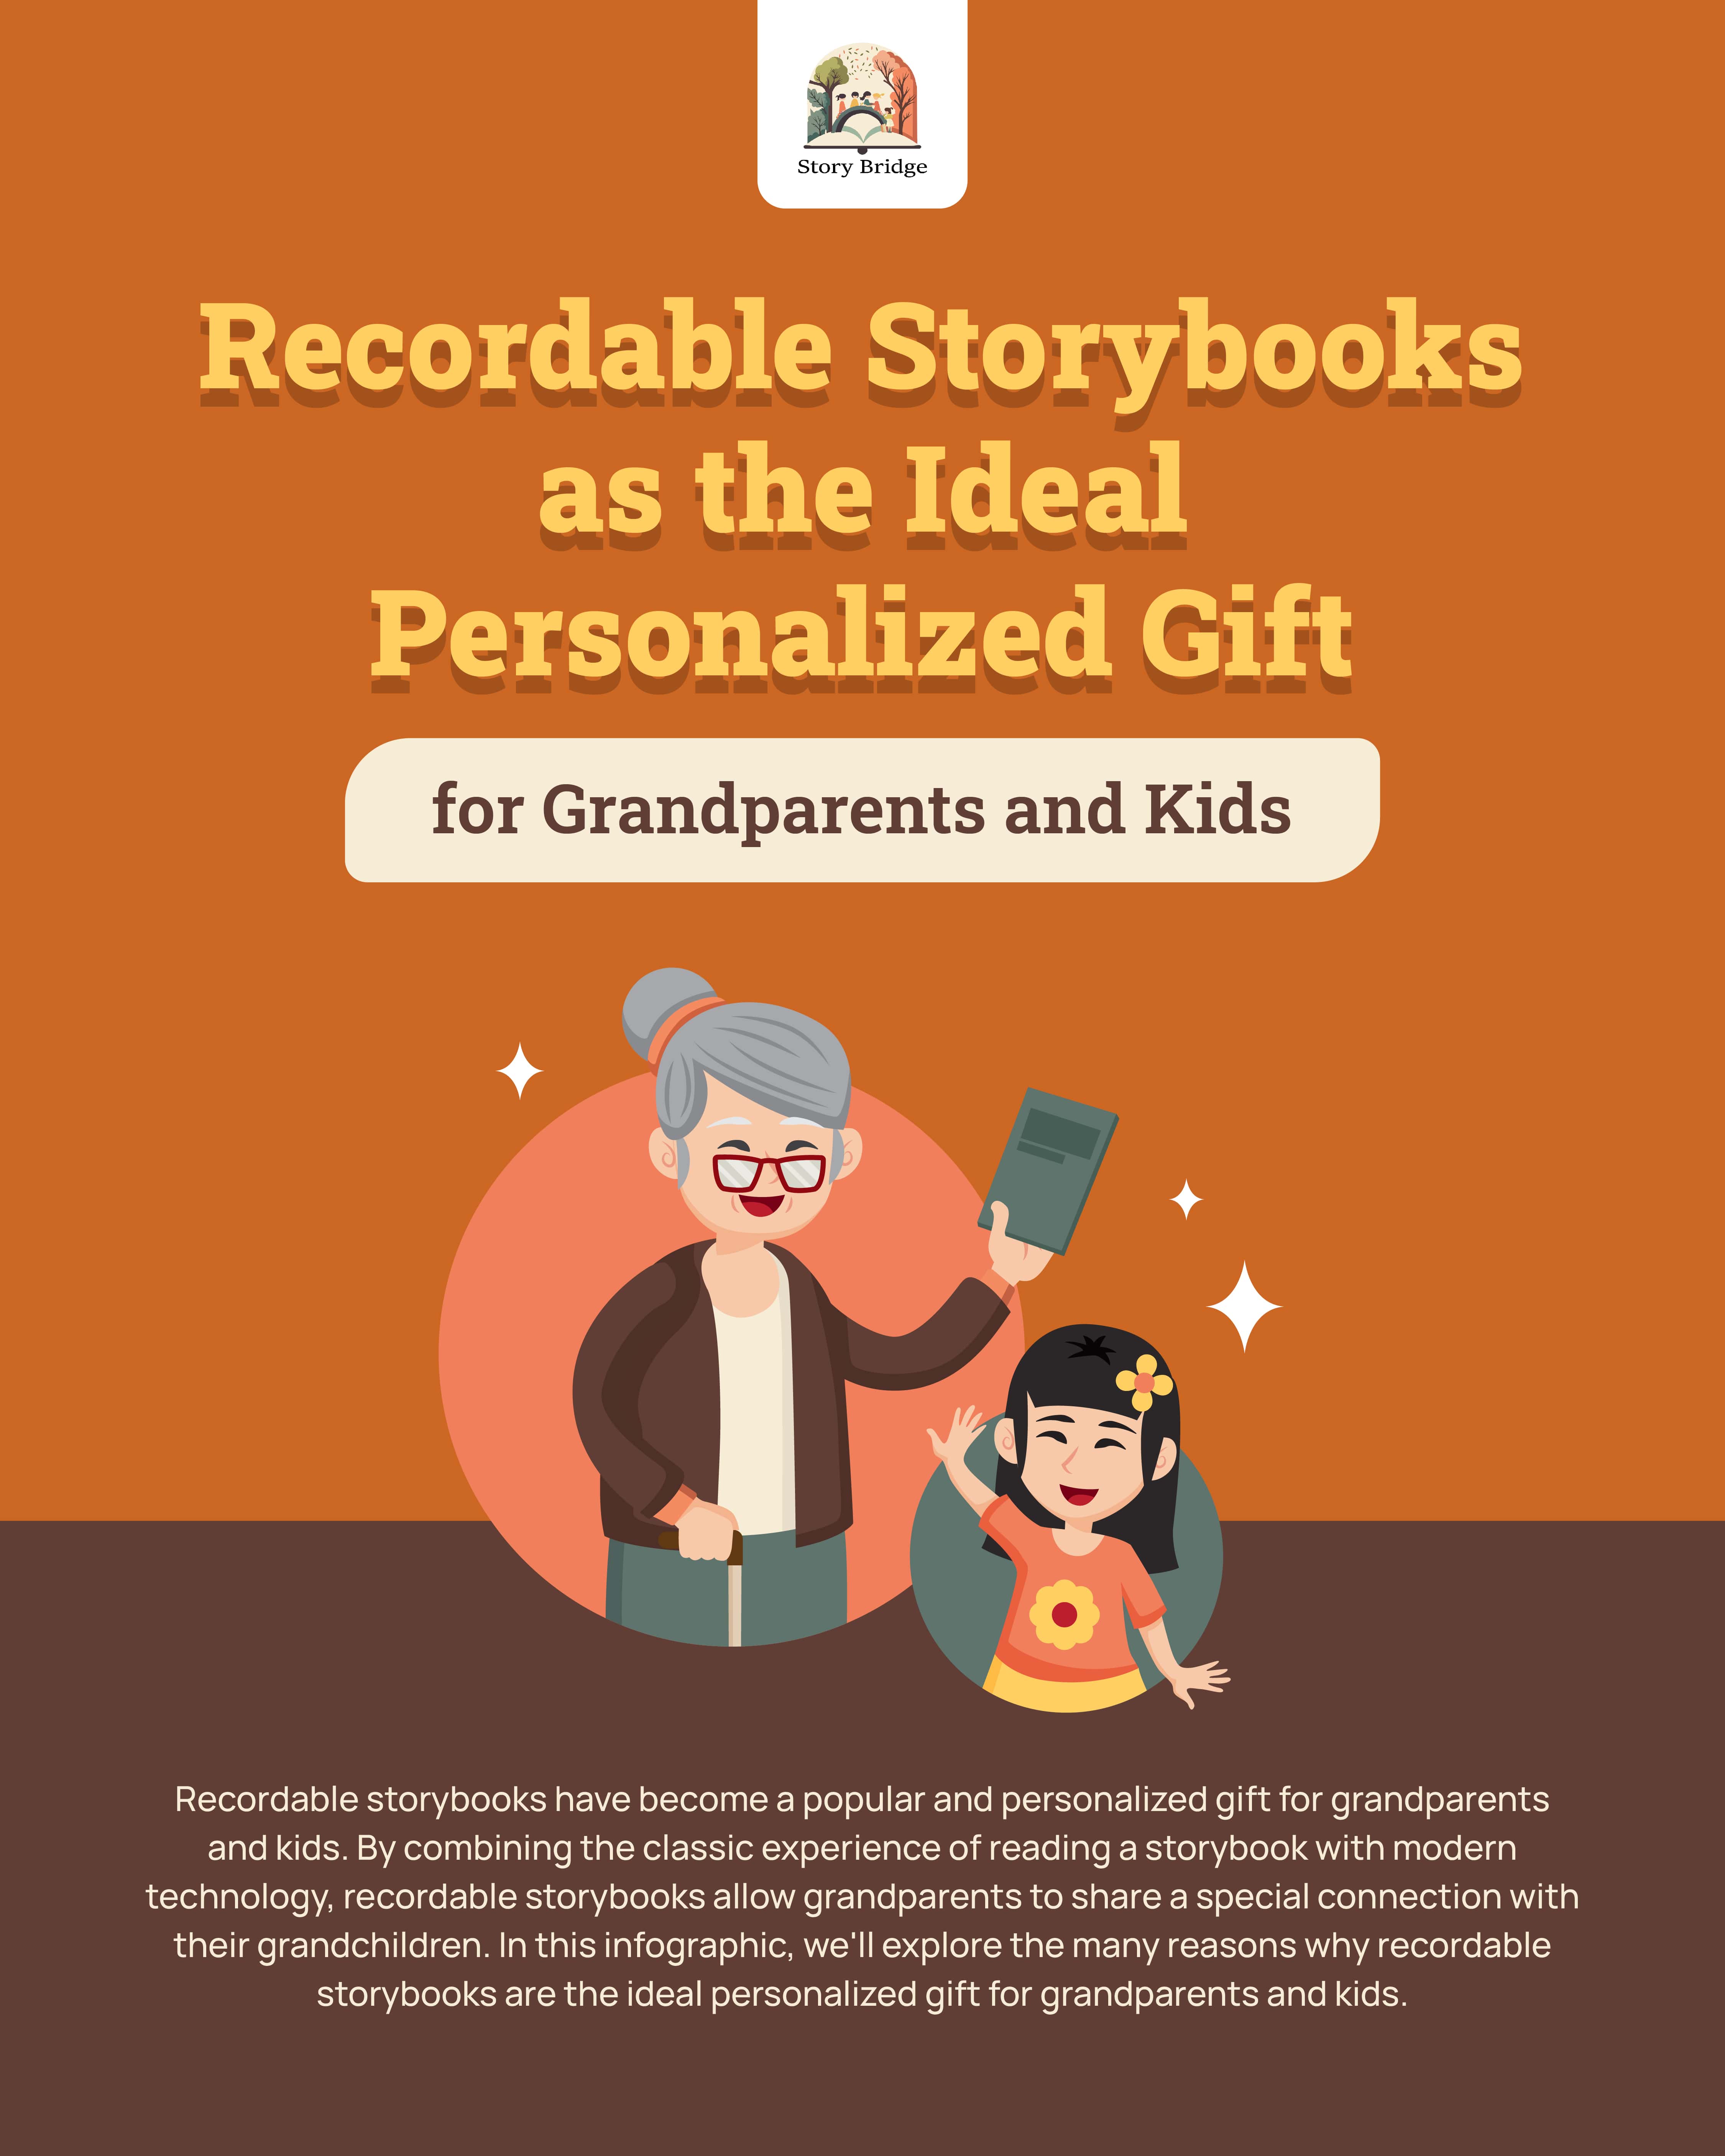 Personalized Storybooks as a gift